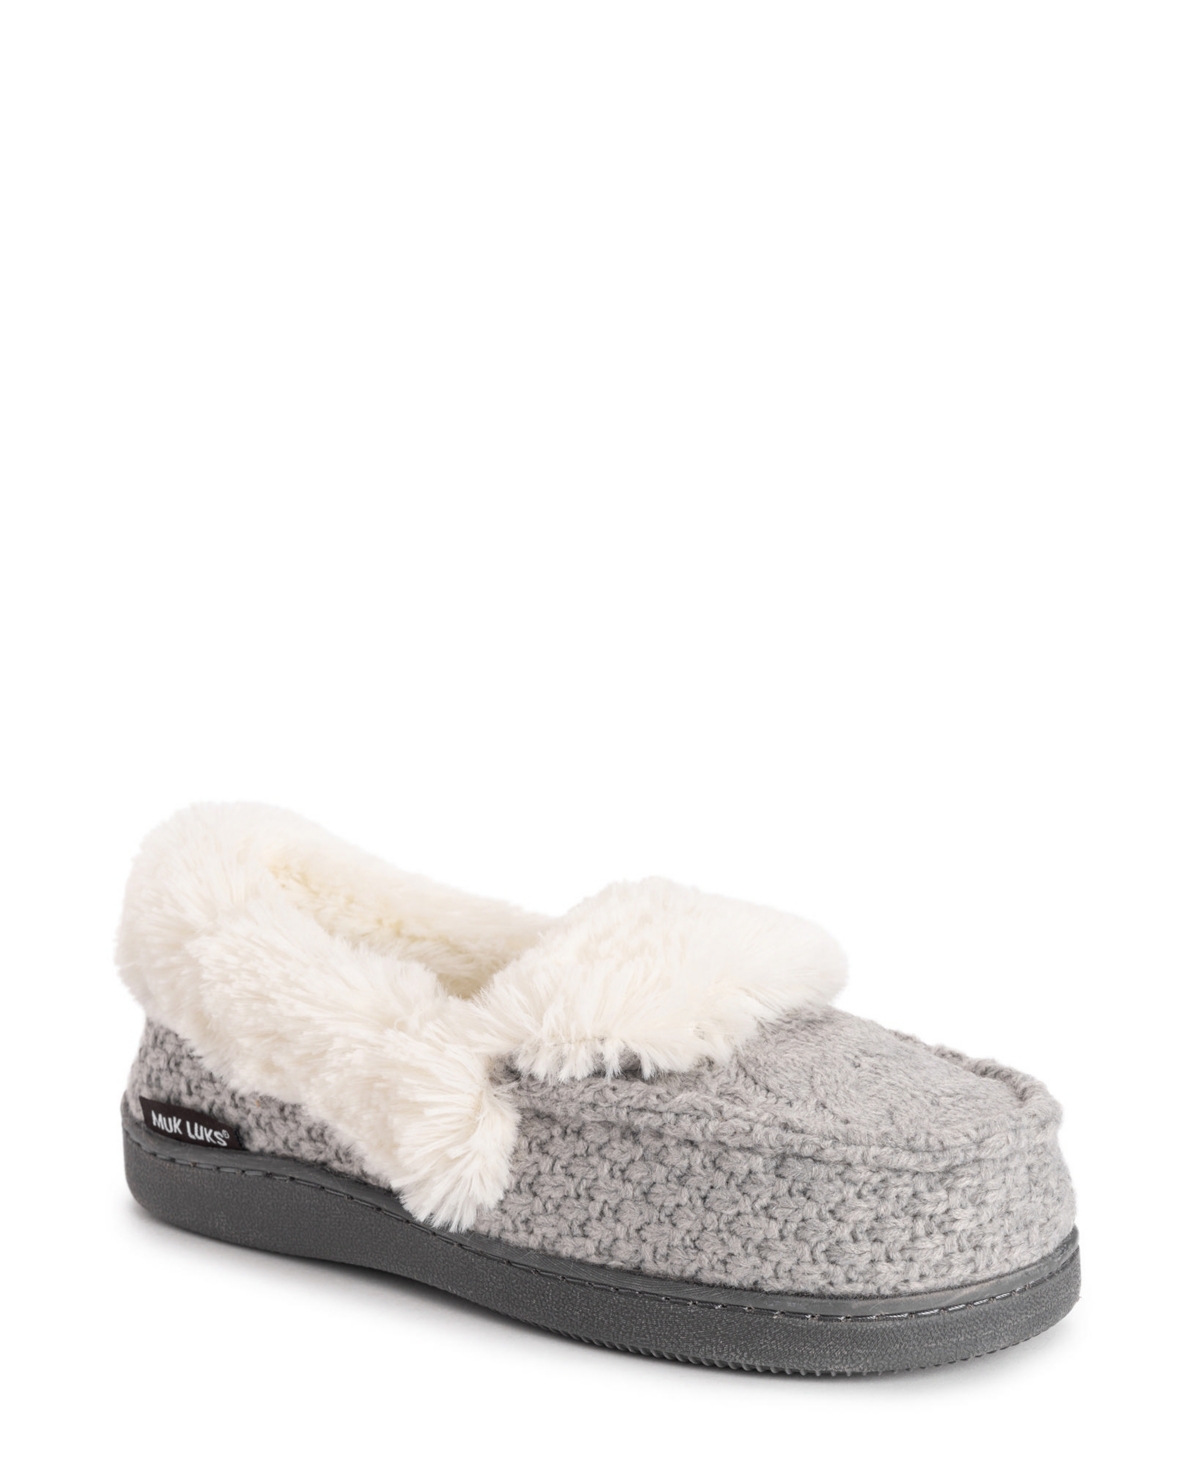 Women's Anais Moccasin Slippers - Gray